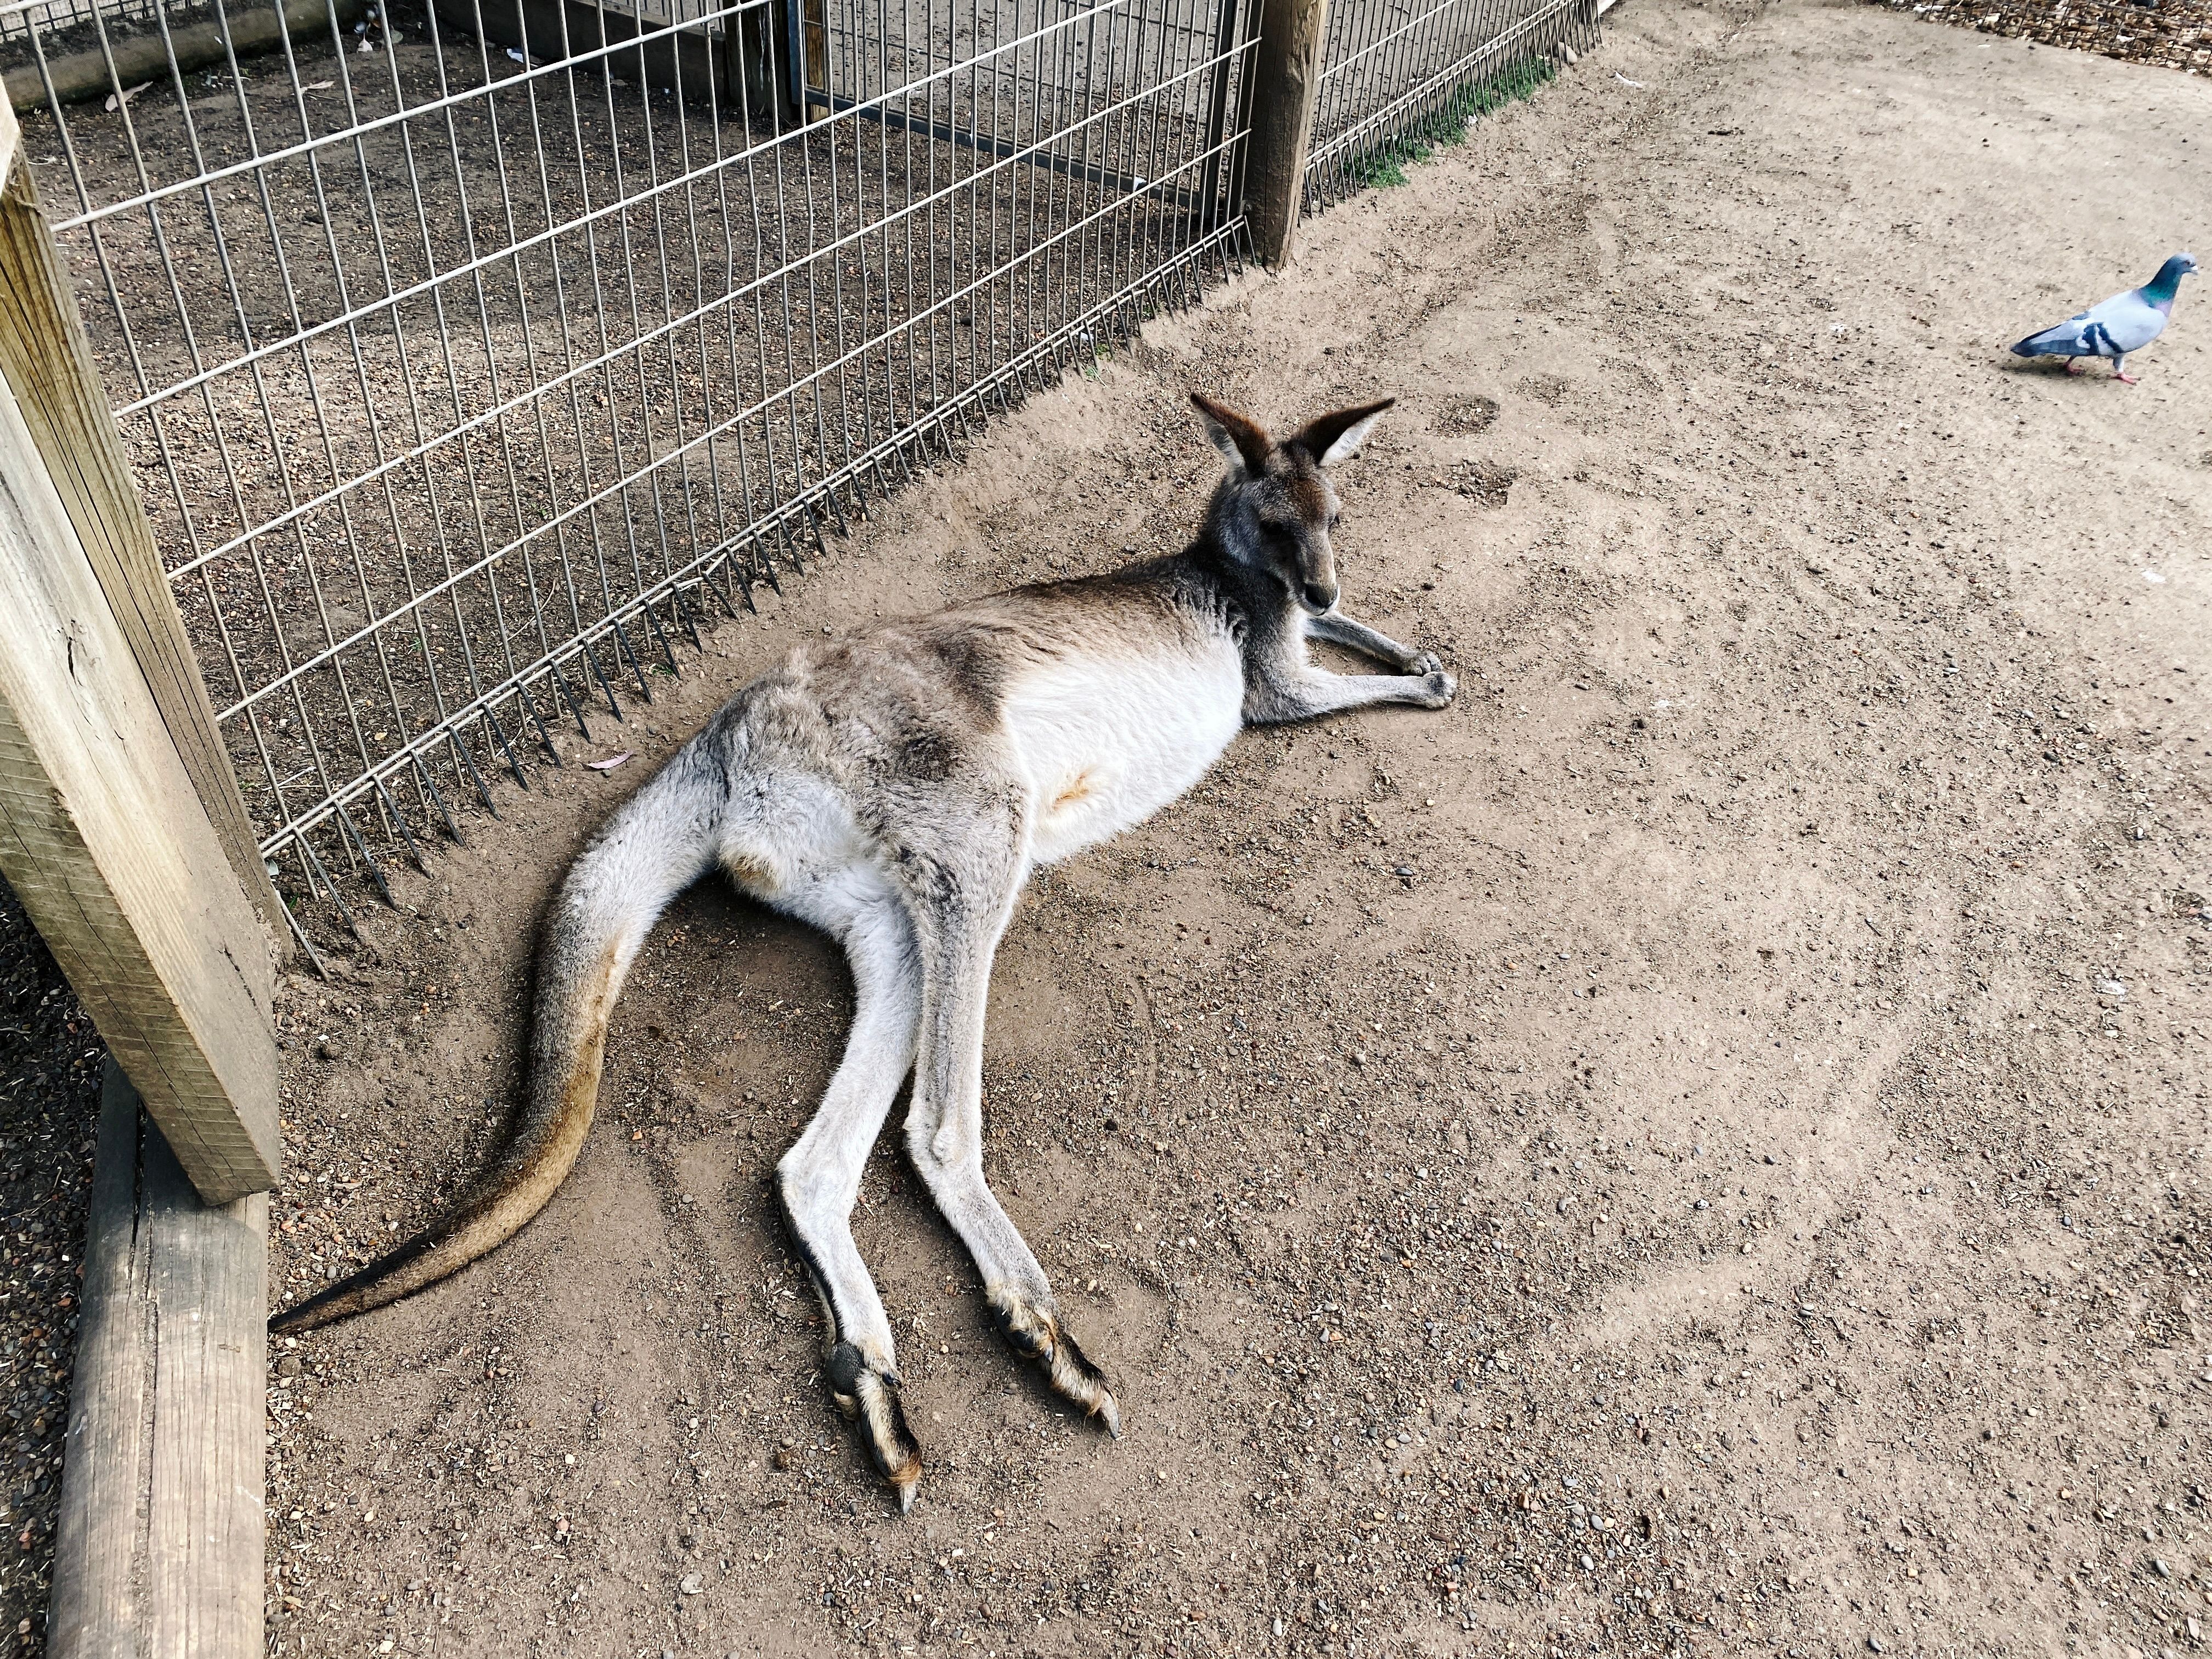 A photo of a grey kangaroo lying on its side, with its torso propped up on its front arms.